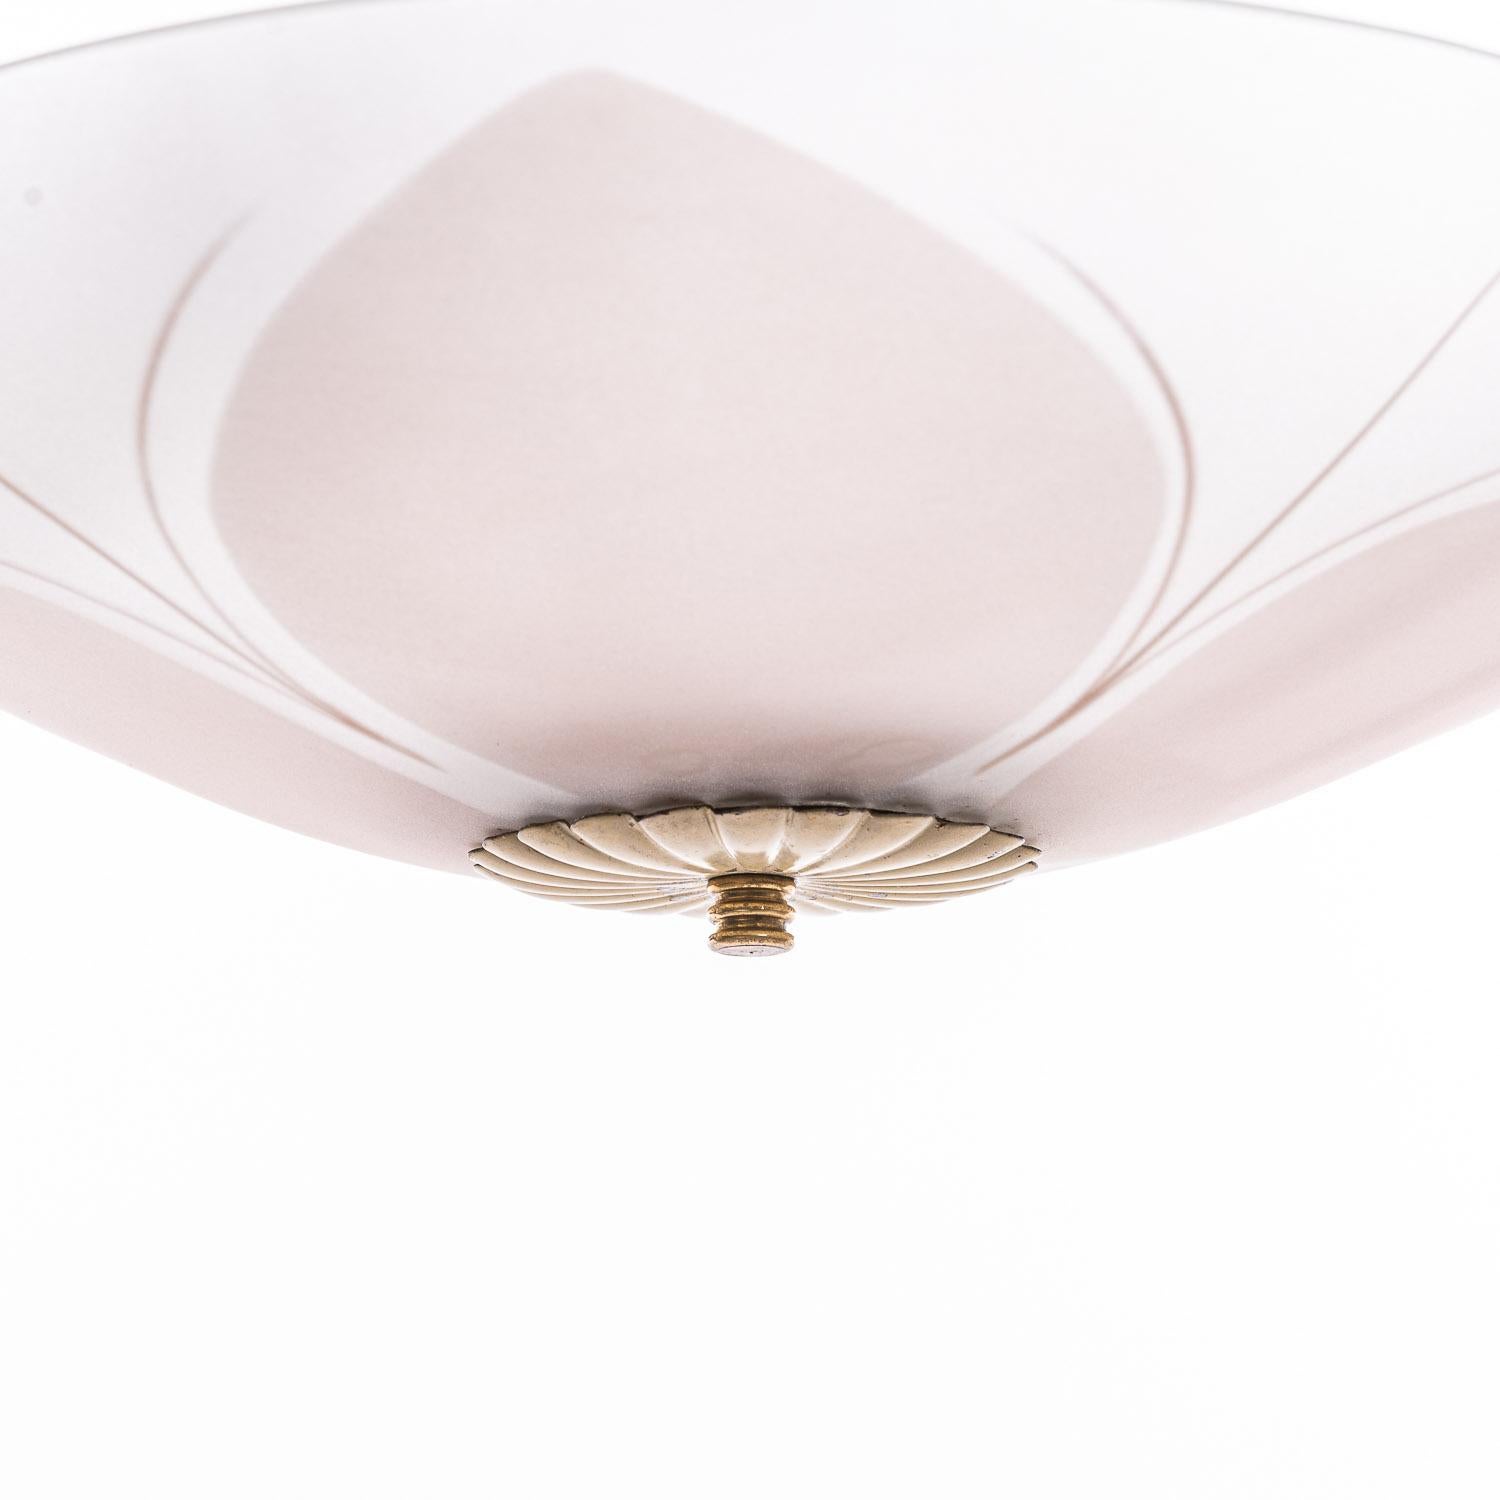 This is a floral-inspired 1940s piece in the style of Pietro Chiesa. The off-white decorative cap compliments the pale-pink glass, both decorated with a nod to a natural, petal-like design motif exhibited by two E14 bulbs.